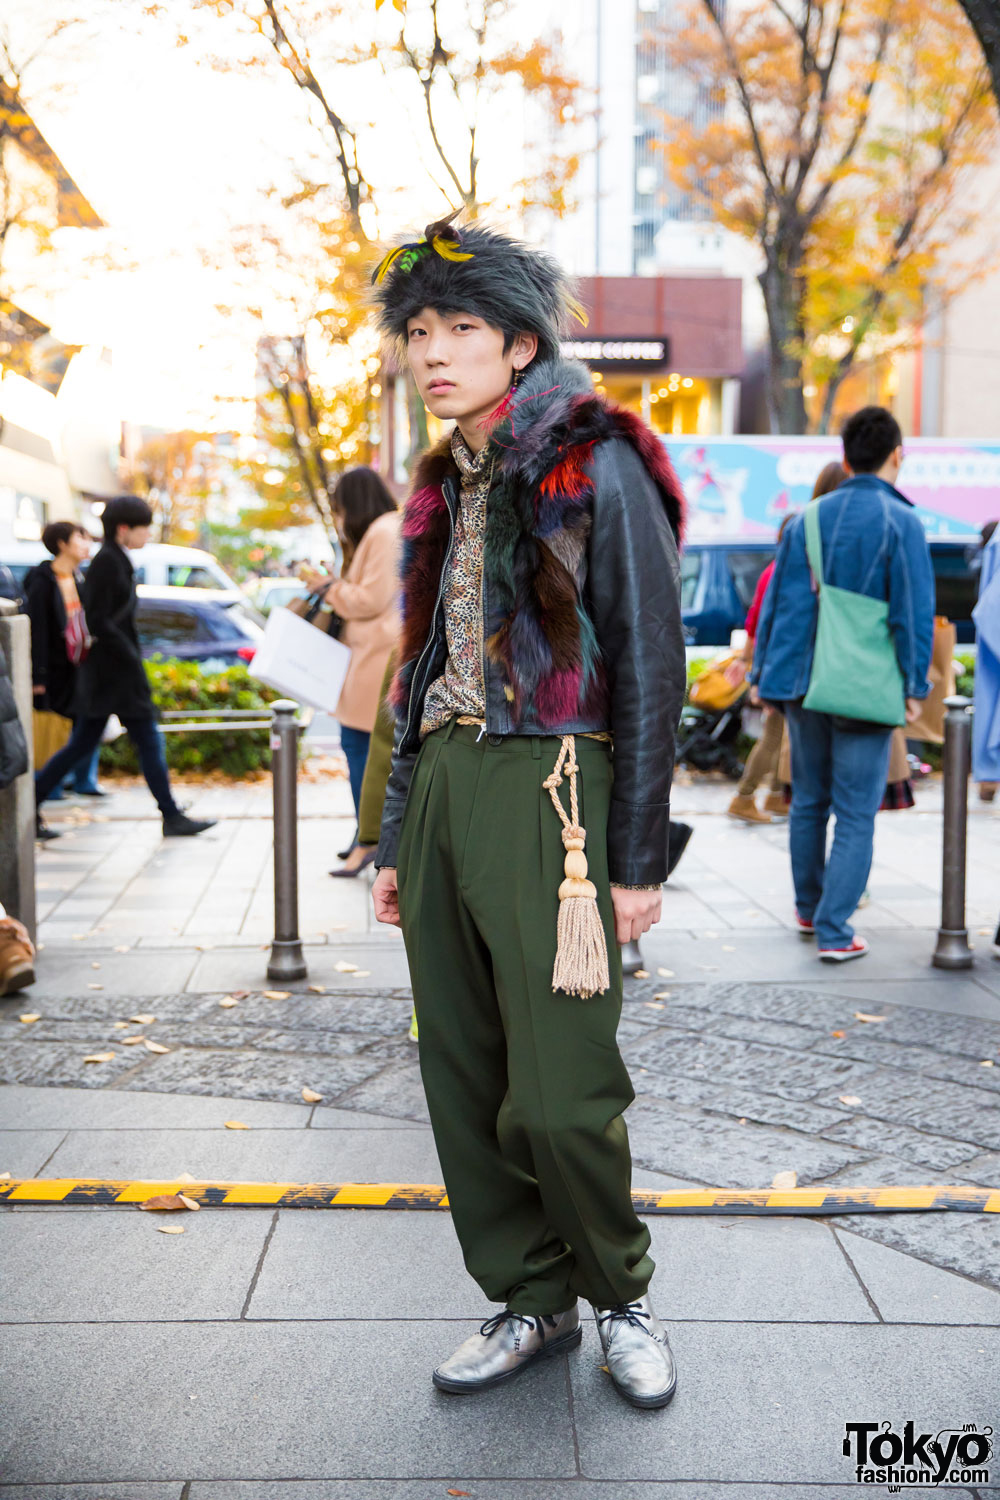 Eclectic Street Style w/ Fuzzy Hat, Animal-Printed Shirt, Fur-Trimmed Leather Jacket & Y’s Pants